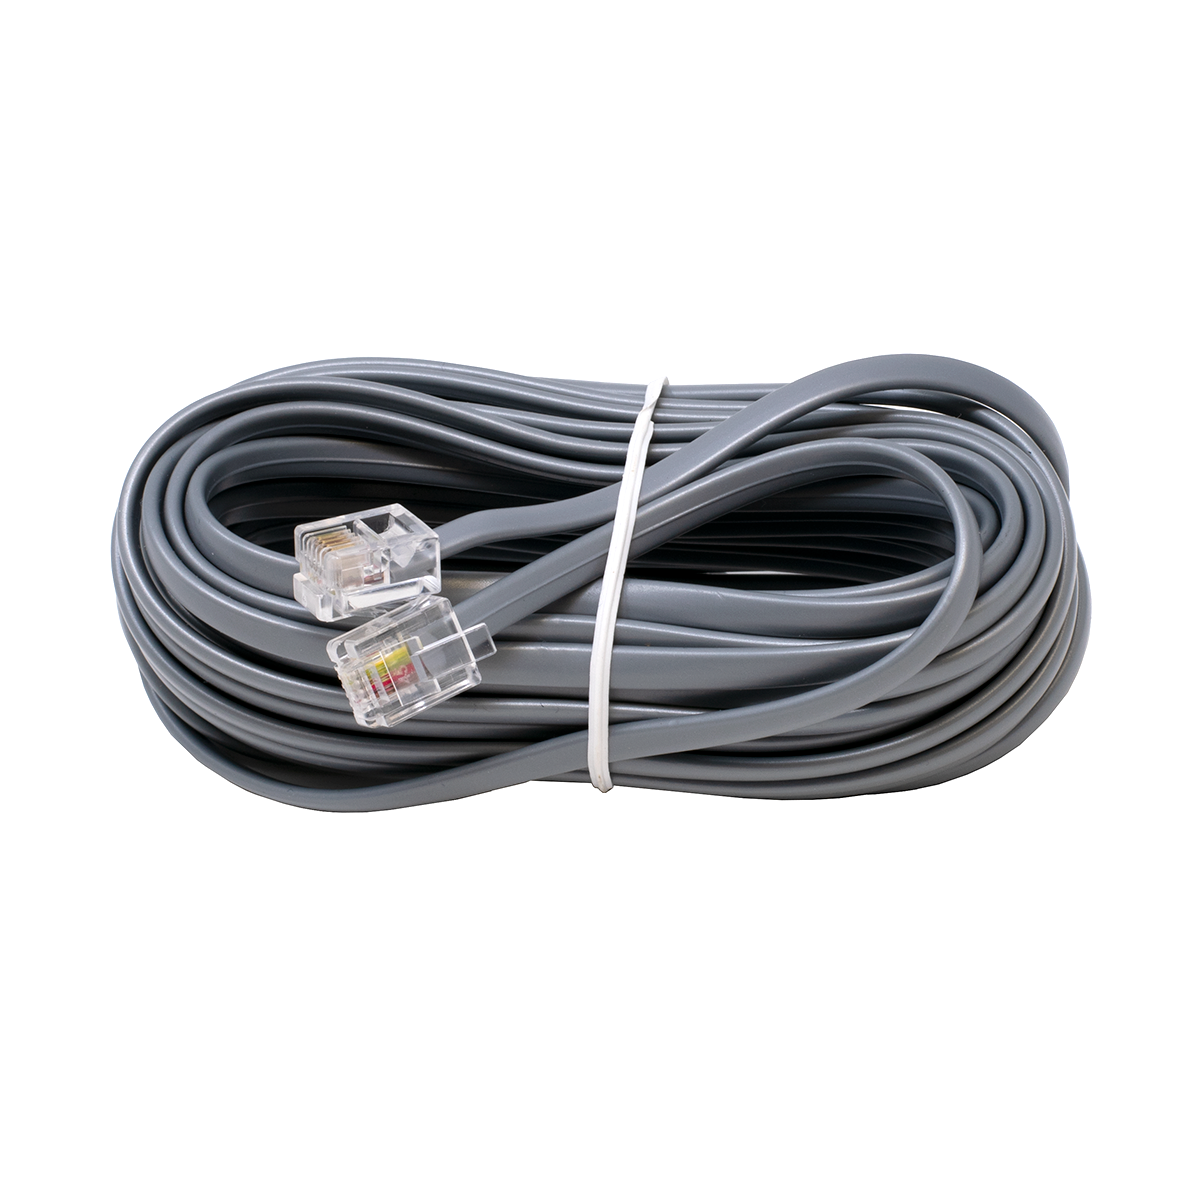 25' 4 Conductor (6P4C) Silver Telephone Line Cord